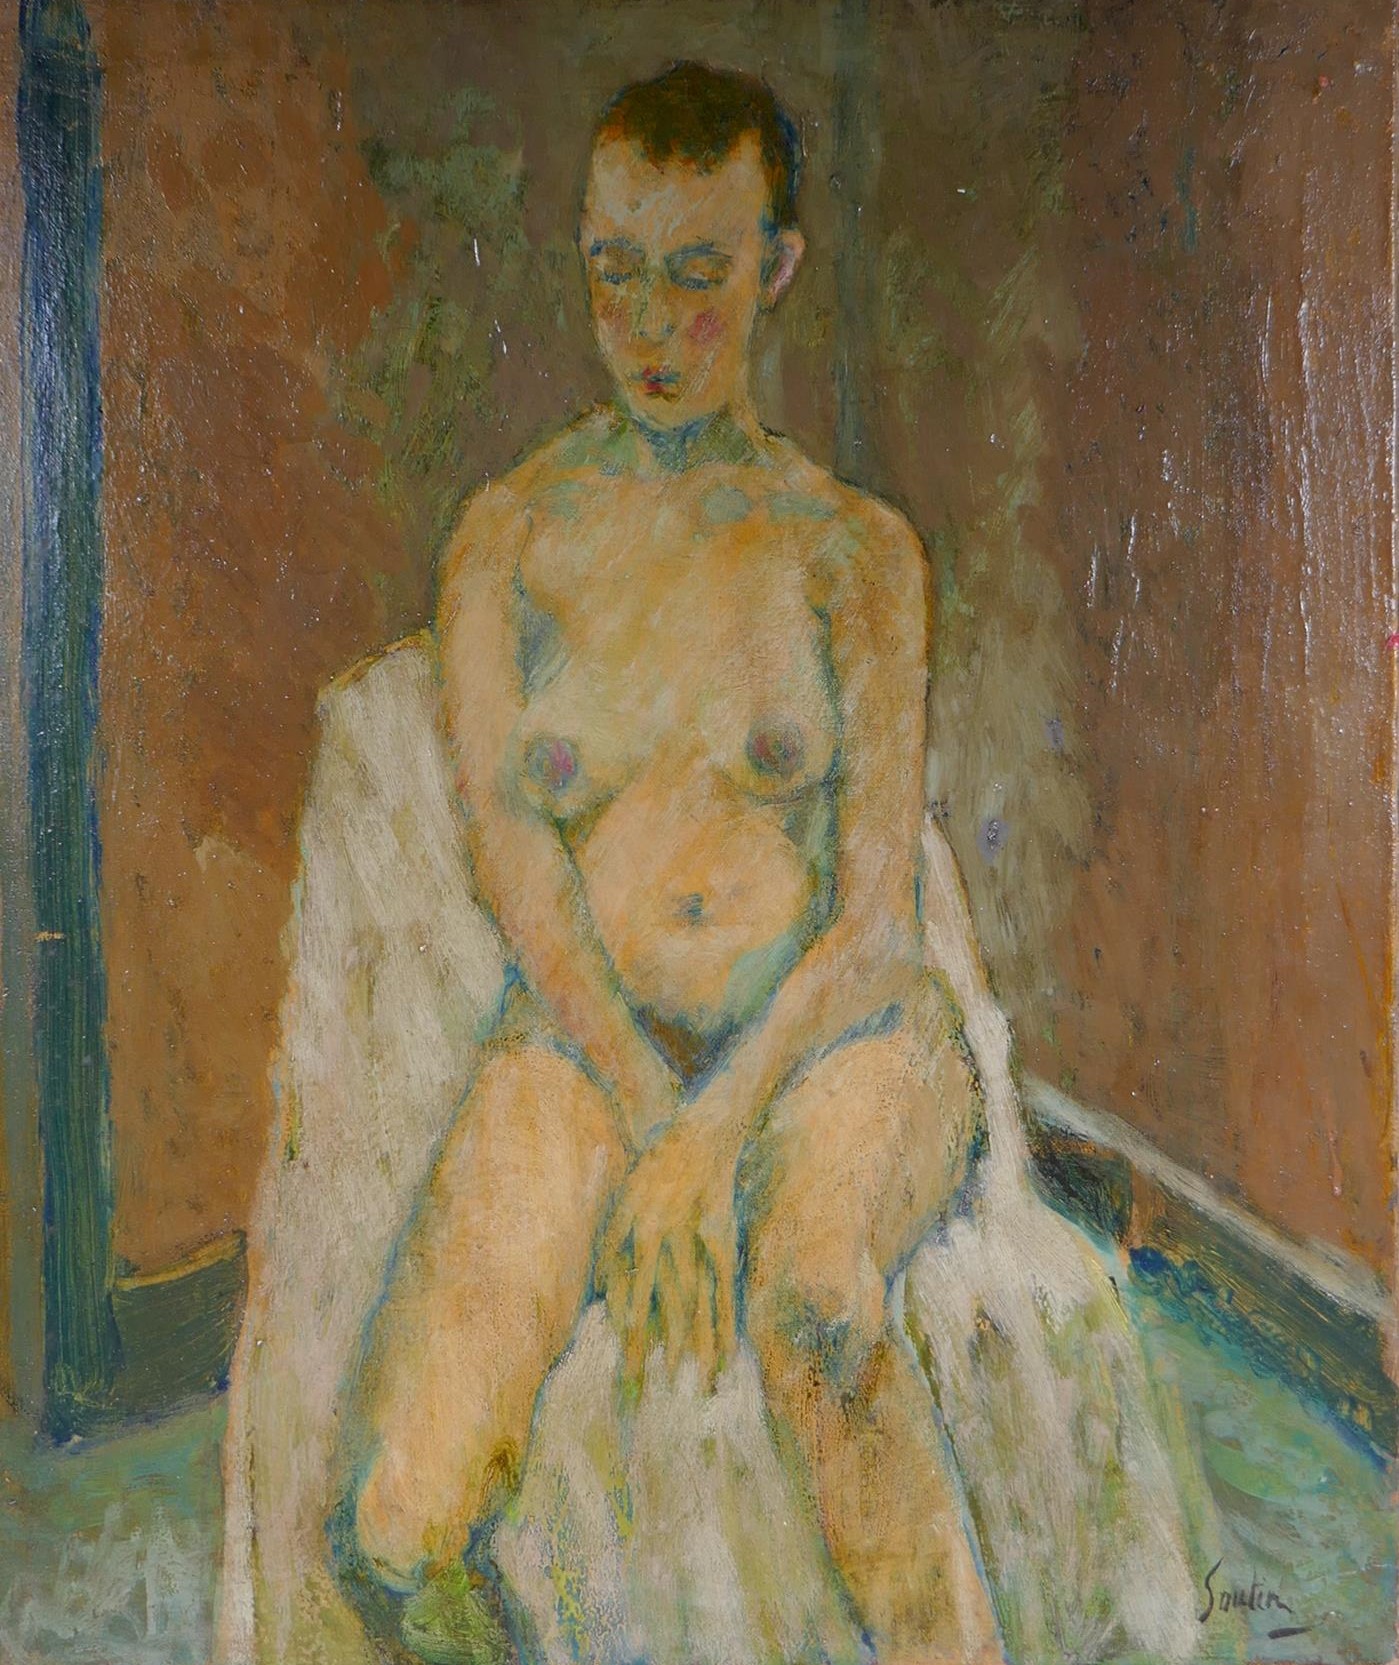 In the style of Chaim Soutine, (French, 1893-1943), female nude, oil on canvas, unframed, 55 x 64cm